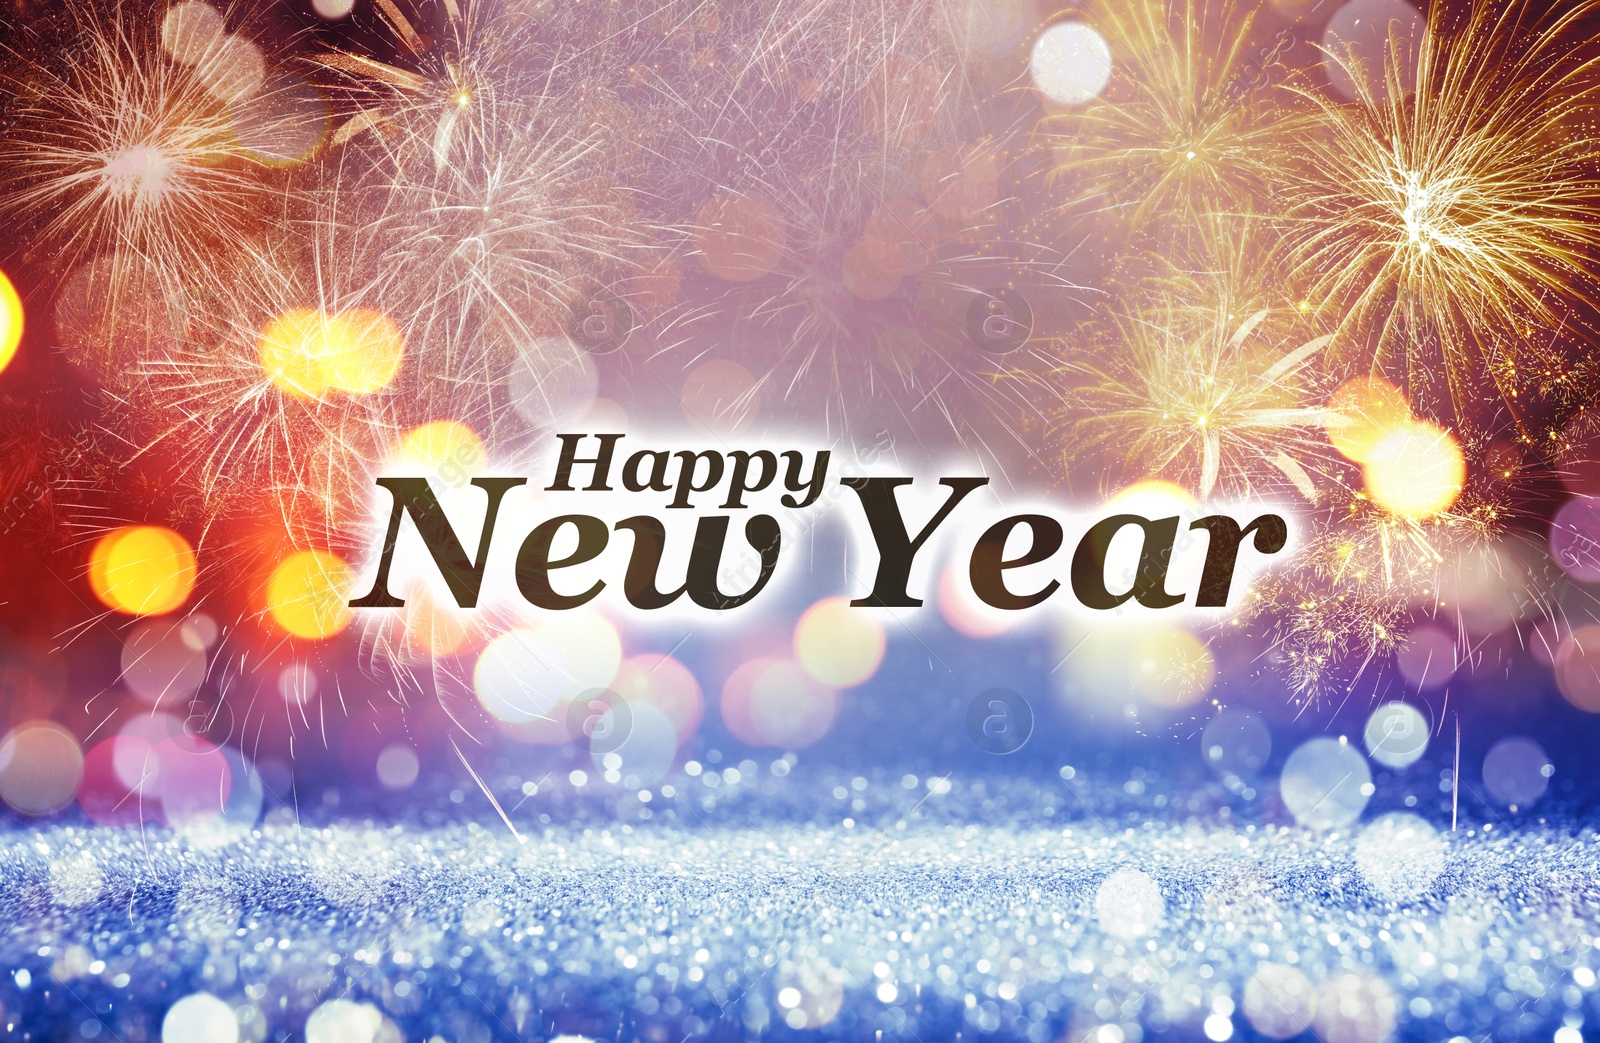 Image of Text Happy New Year on festive background with fireworks, bokeh effect